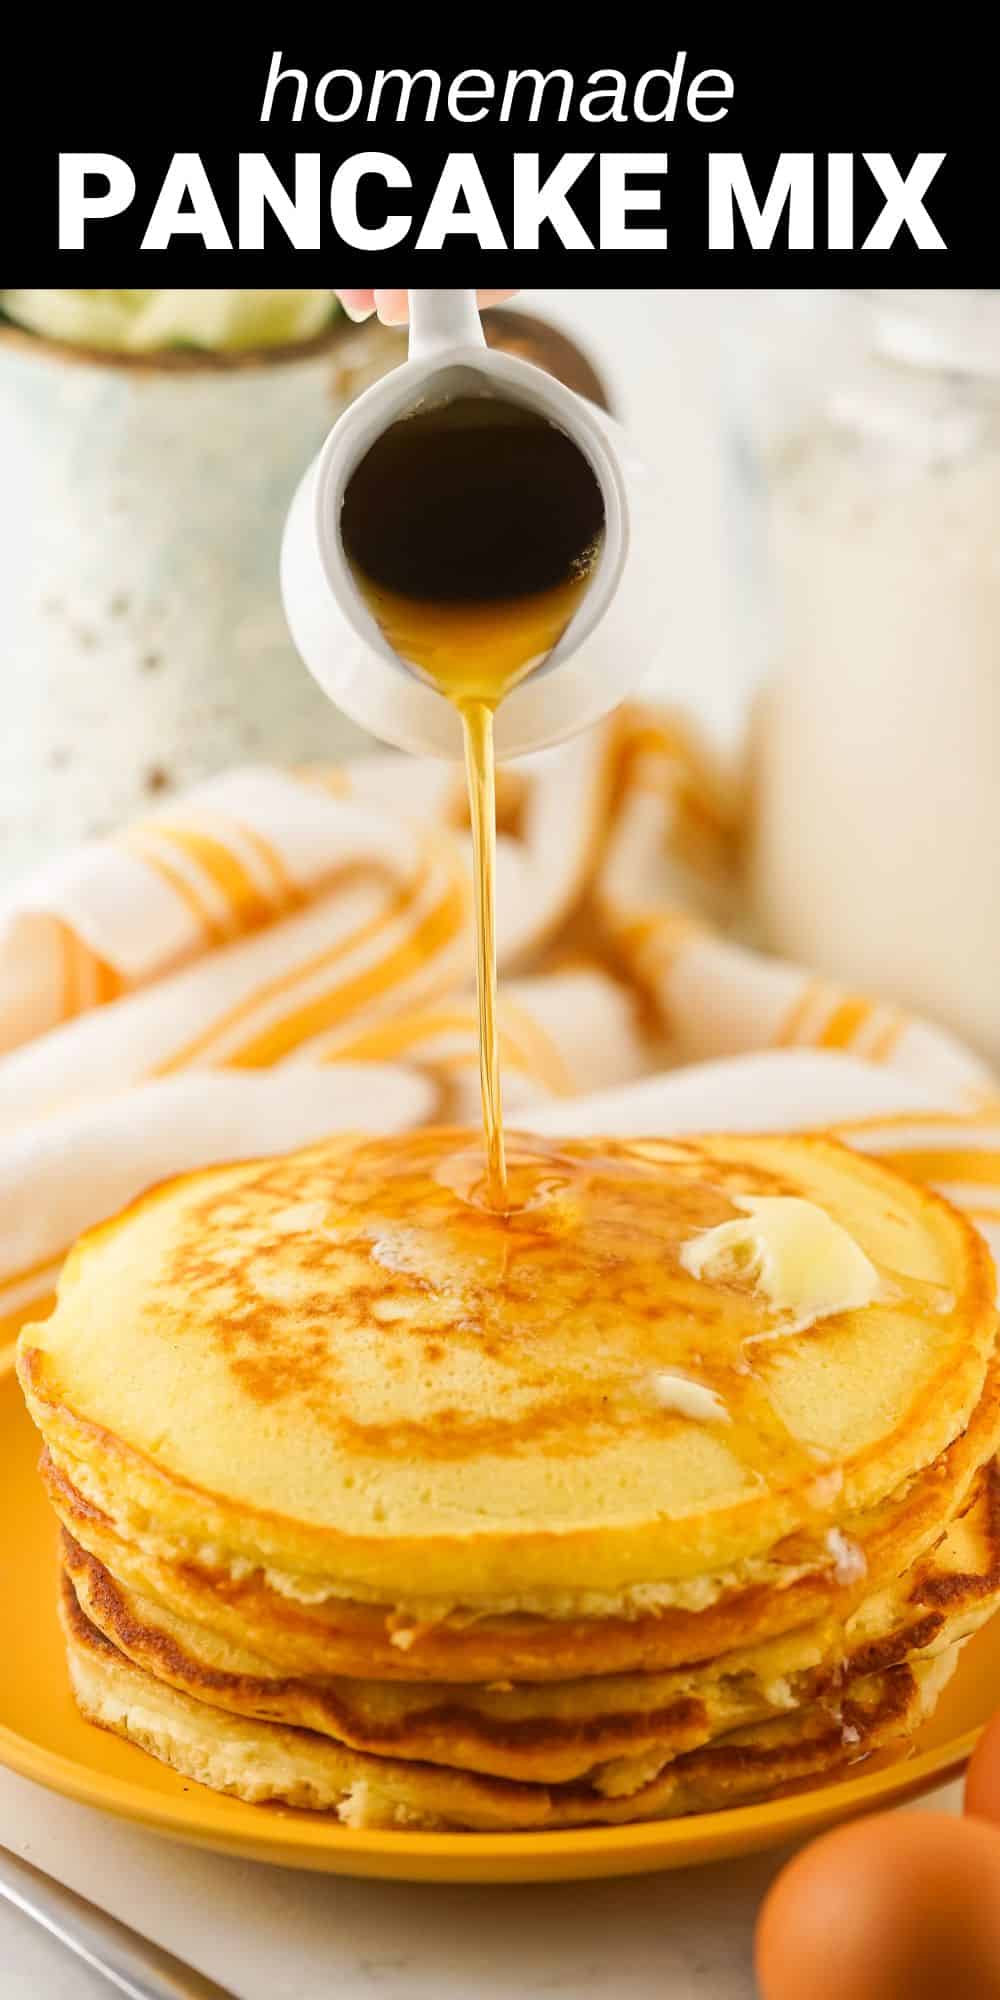 When you see how easy it is to make this Homemade Pancake Mix, you'll never buy store-bought again. This mix makes the best, lightest and fluffiest pancakes, using just a handful of simple pantry staples.